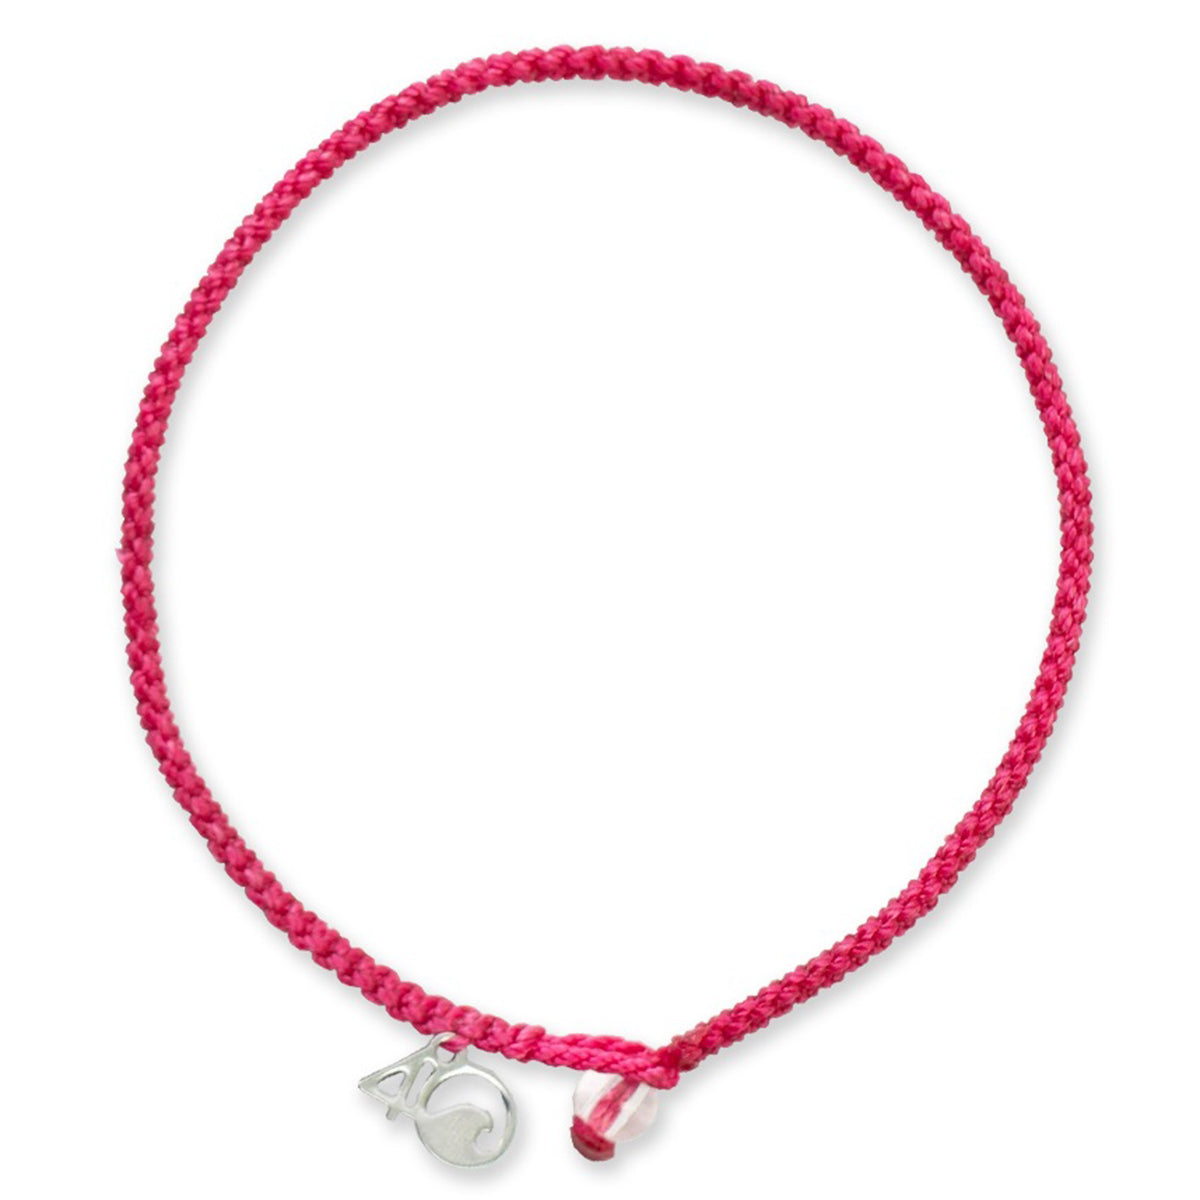 4Ocean Flamingo Braided Bracelet with a silver charm on a white background.